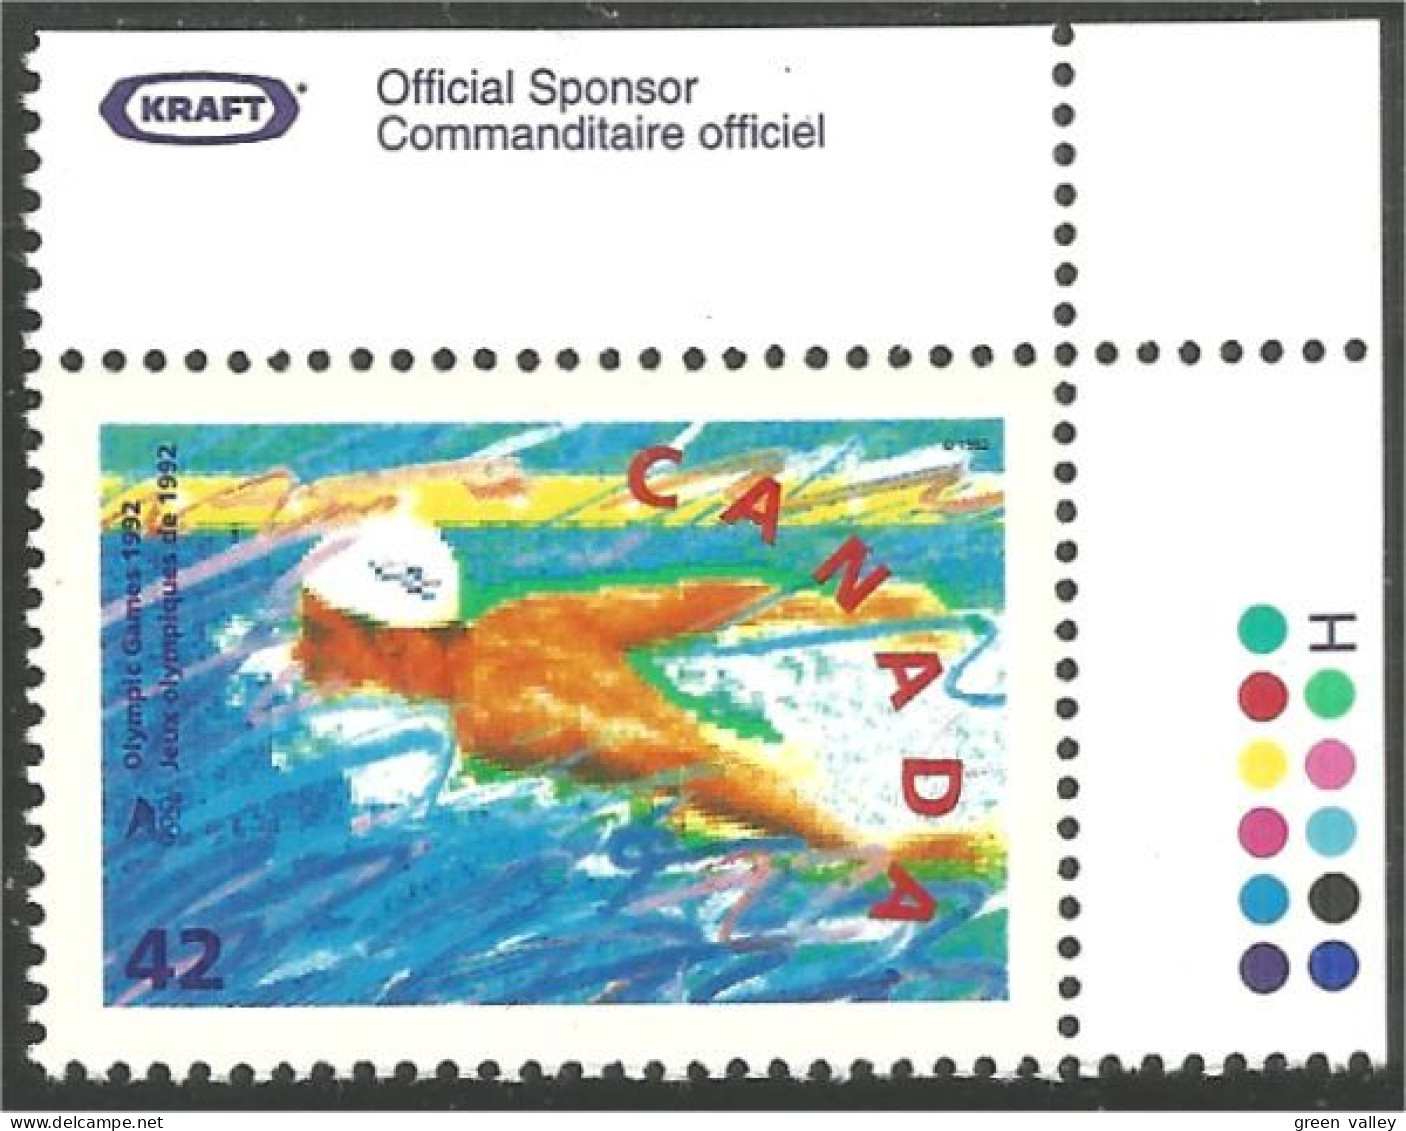 Canada Barcelone Swimming Natation KRAFT Official Sponsor Block Couleurs MNH ** Neuf SC (C14-18pc) - Unused Stamps